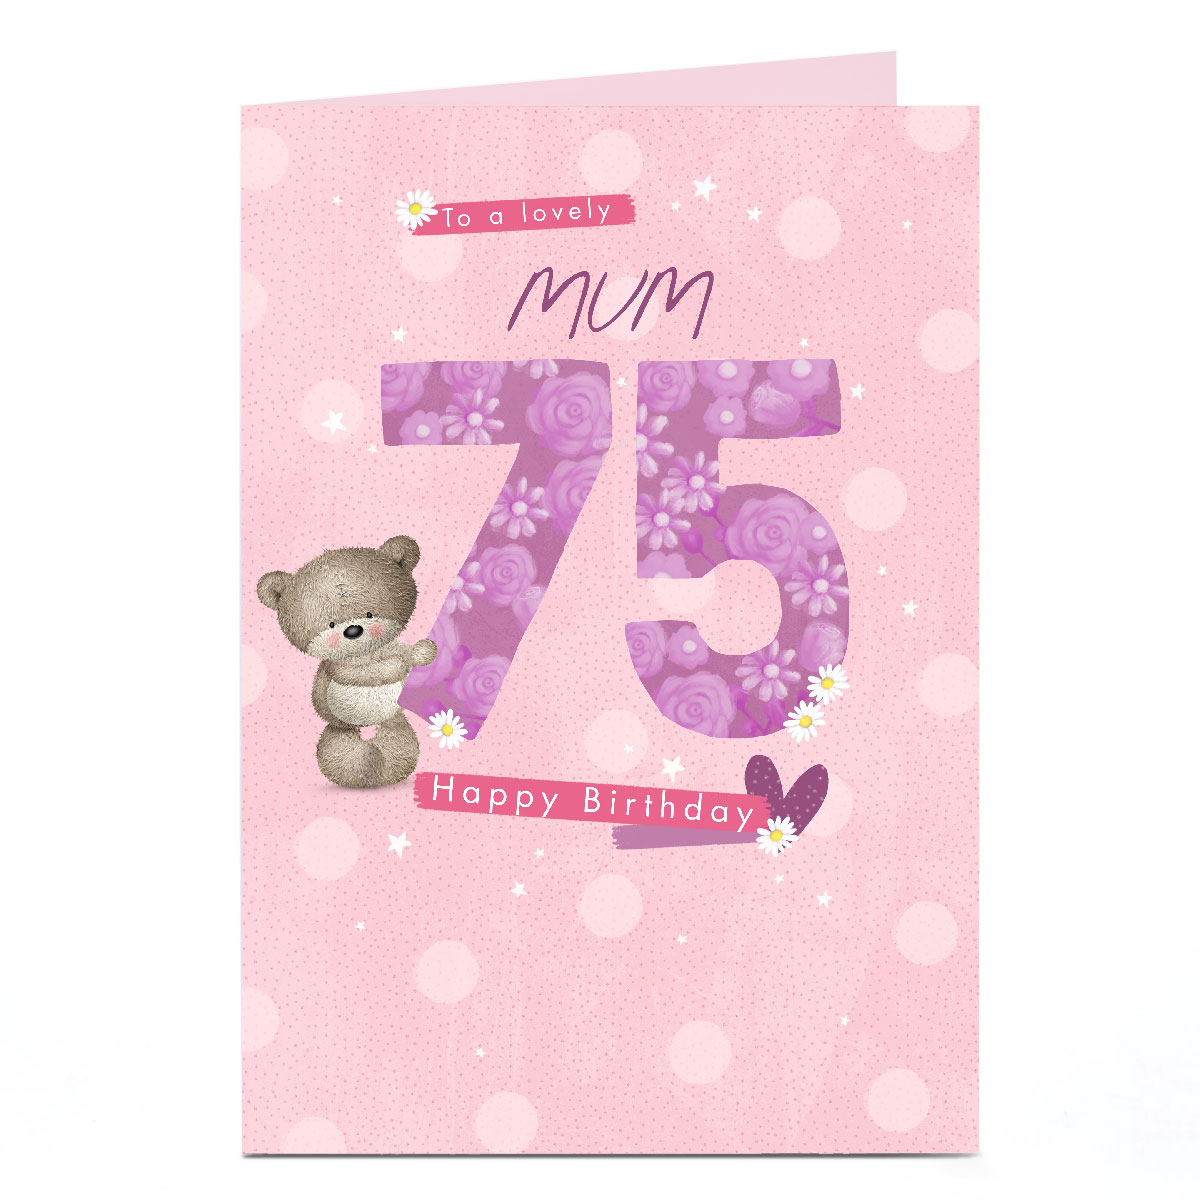 Personalised Hugs Birthday Card - 75th Birthday To A Lovely...